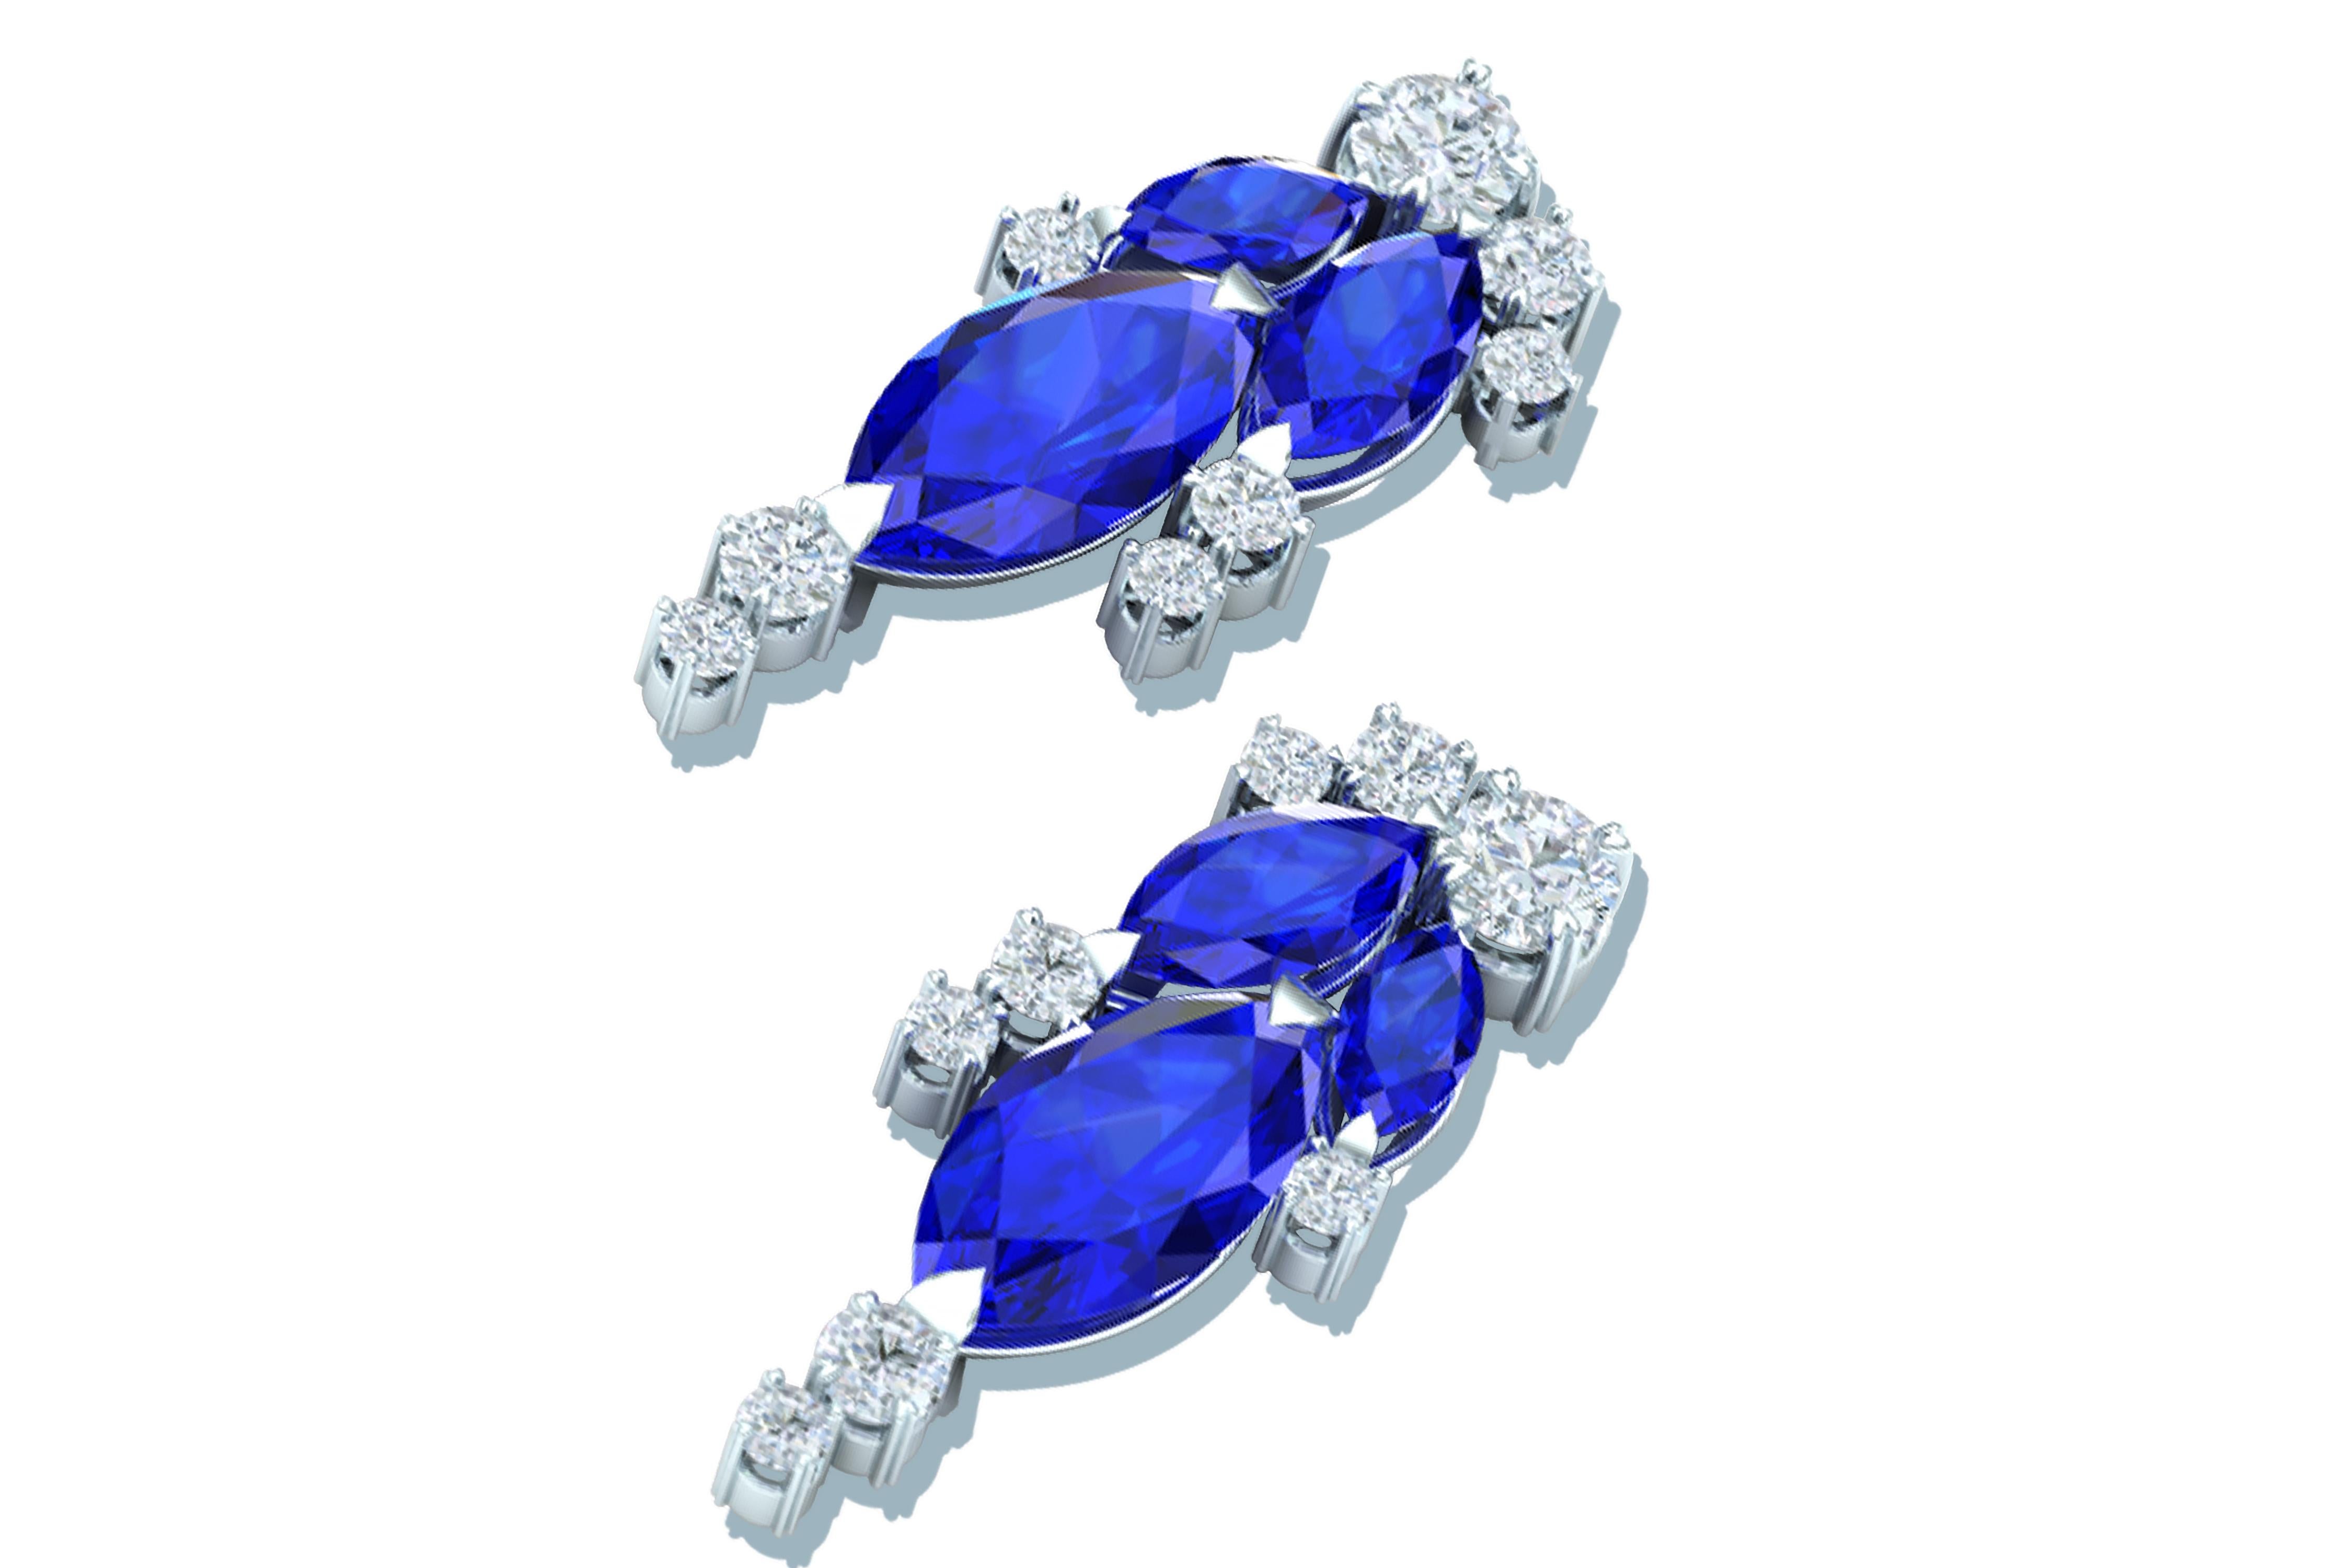 These classic and beautiful sapphire and diamond earrings consist of the following.  There are 1 carat of rich blue natural sapphires heated but not treated.  The sapphire have a even rich blue that almost glows.  The blue sapphires are complimented